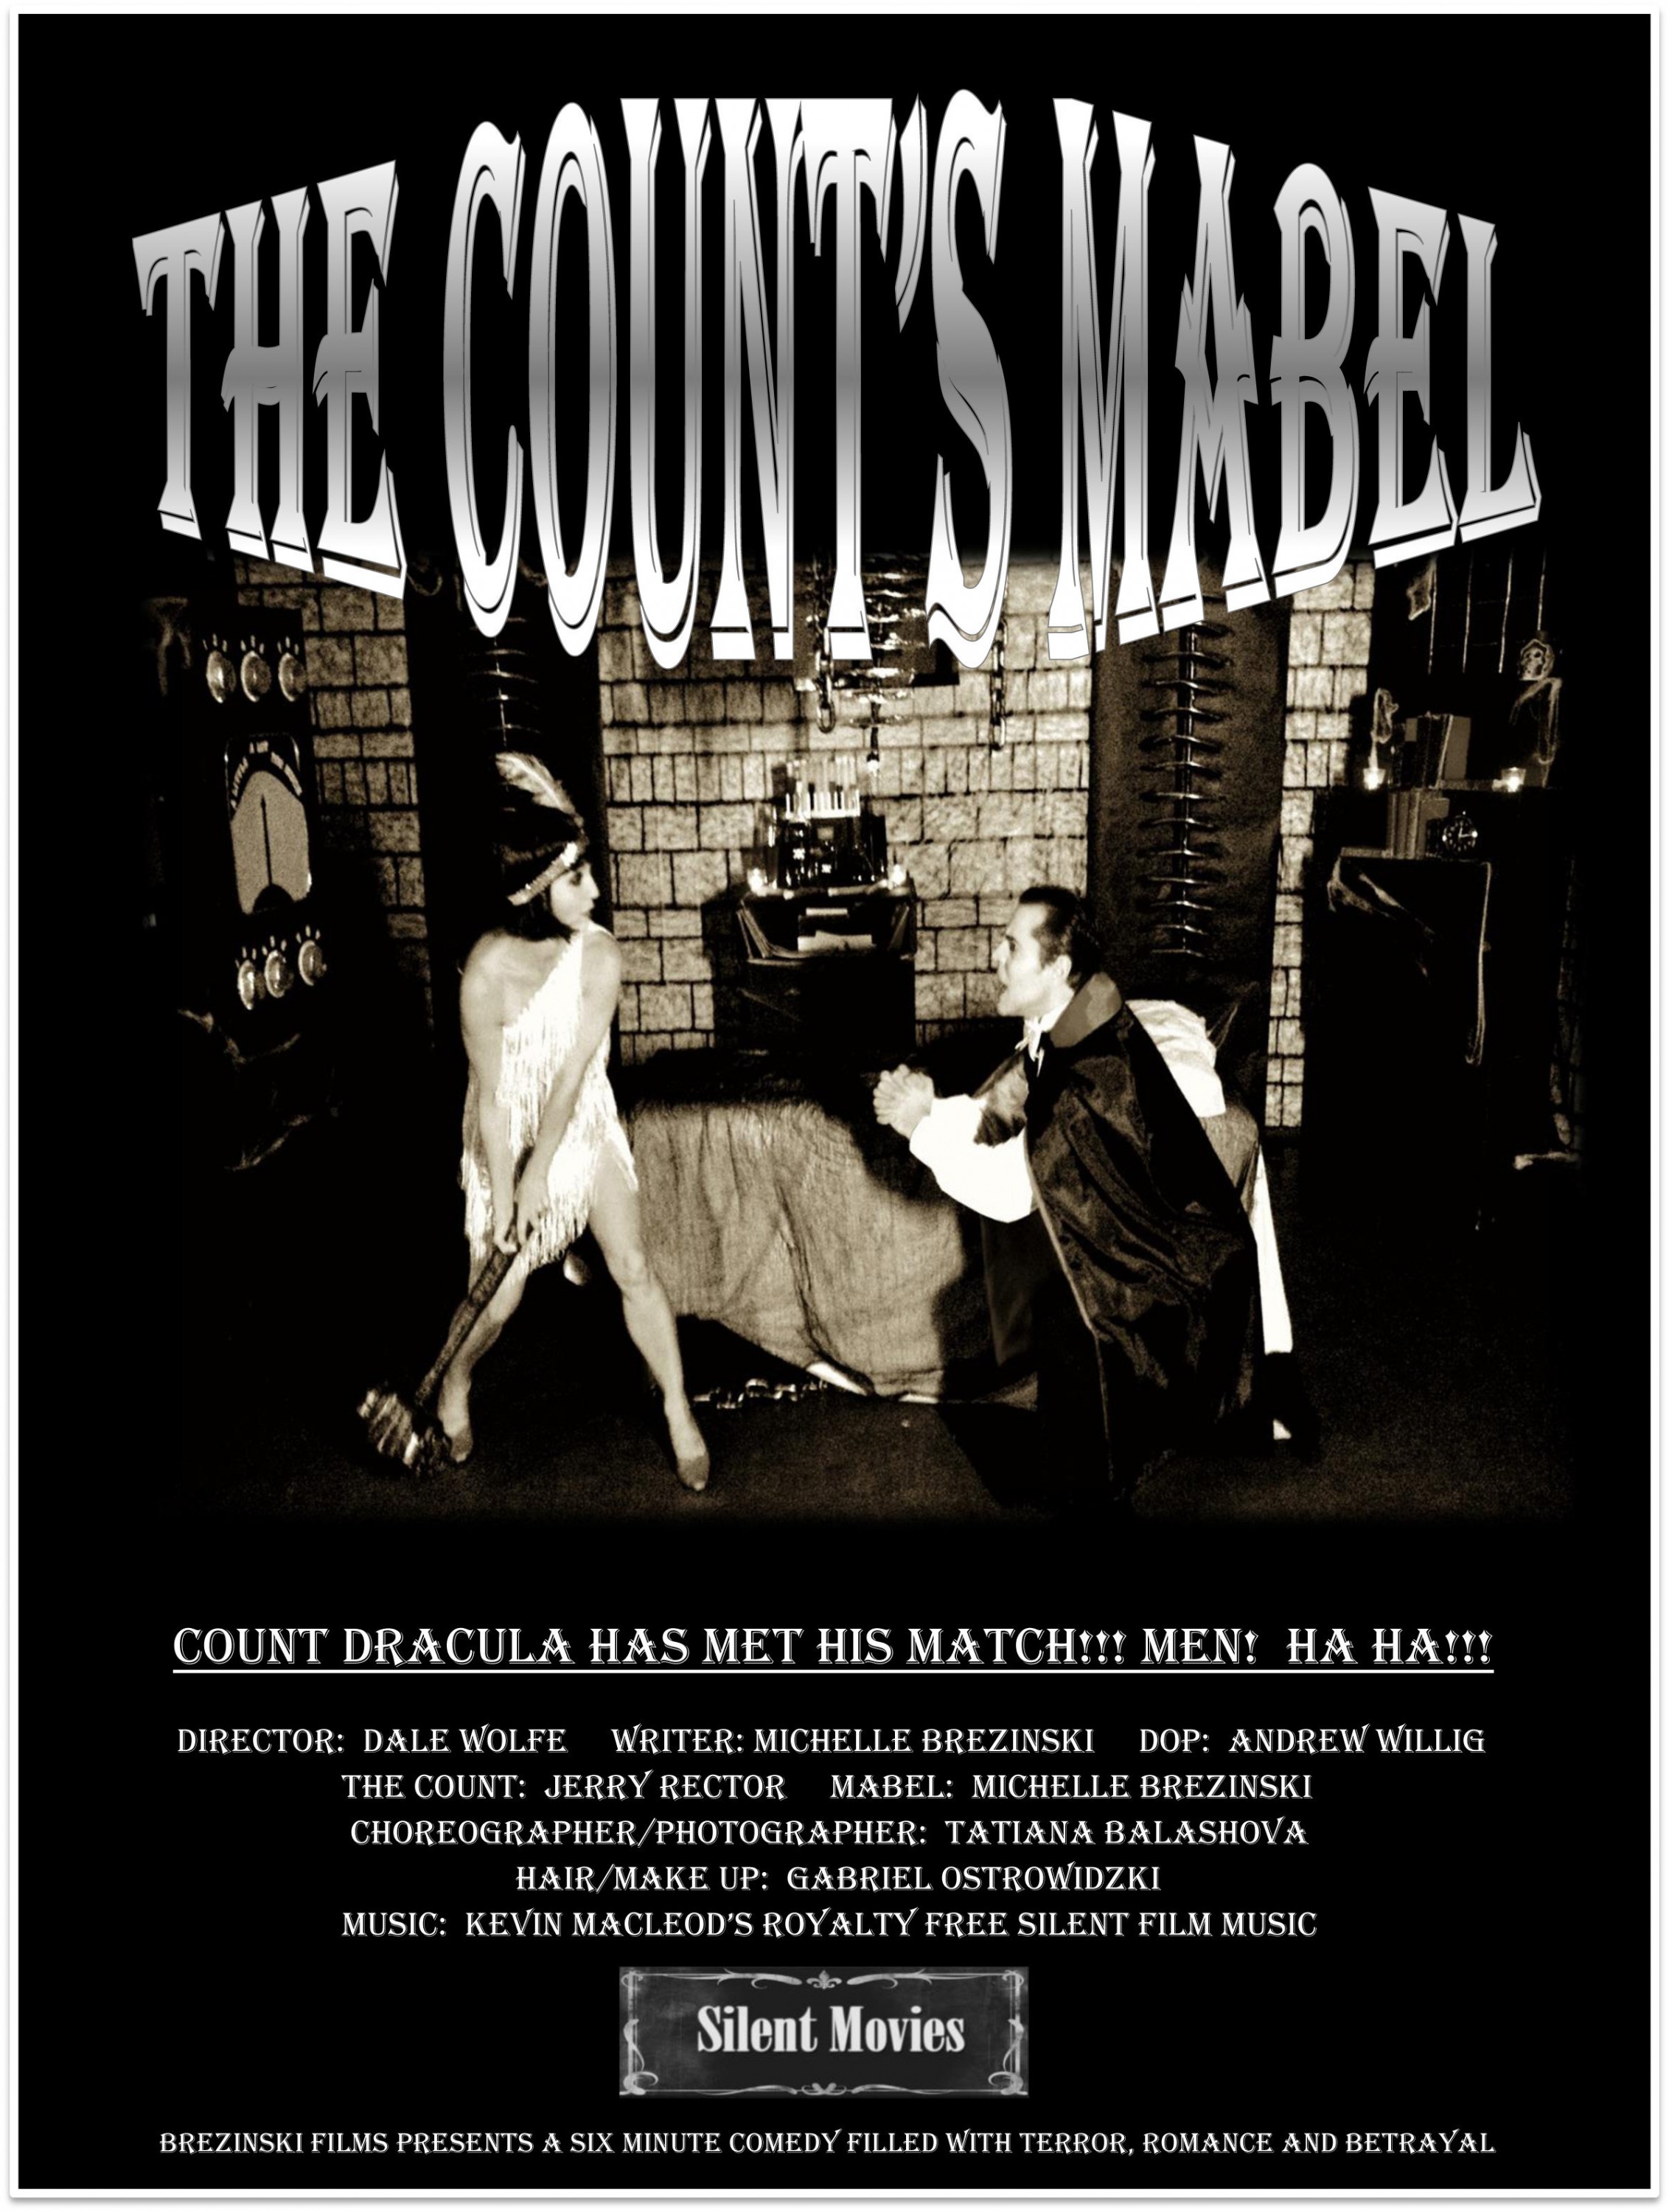 Mega Sized Movie Poster Image for The Count's Mabel